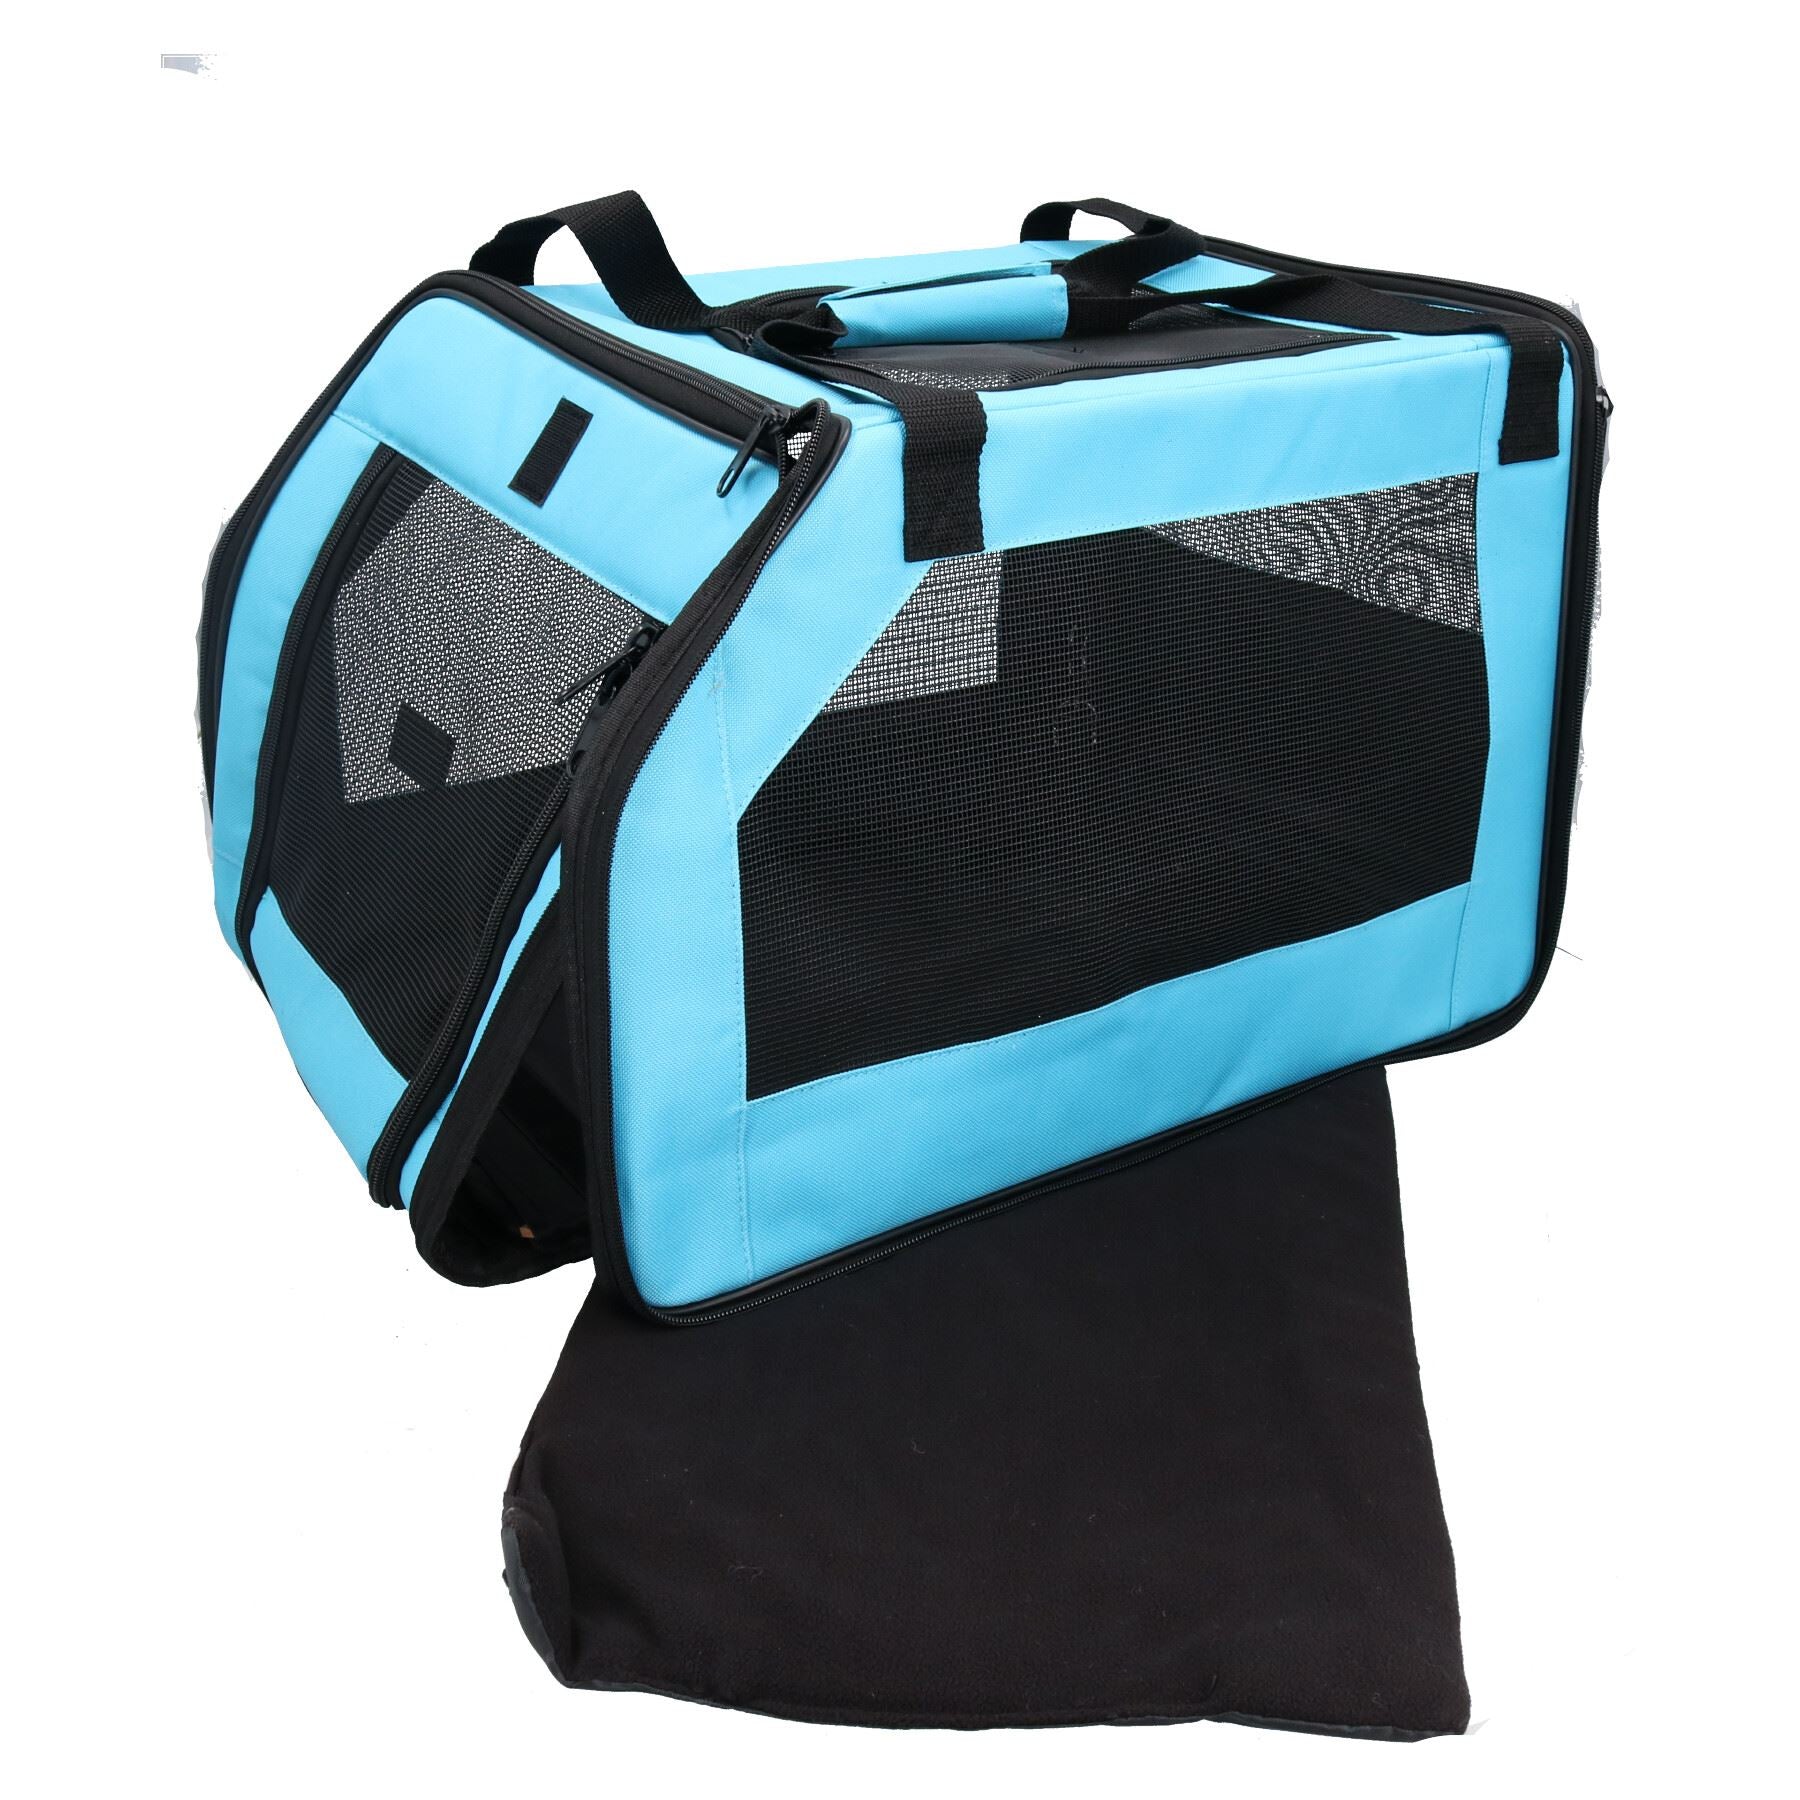 Blue Medium Dog Puppy Travel Car Seat Carrier 30.5x33x51cm For Pets Upto 25lbs